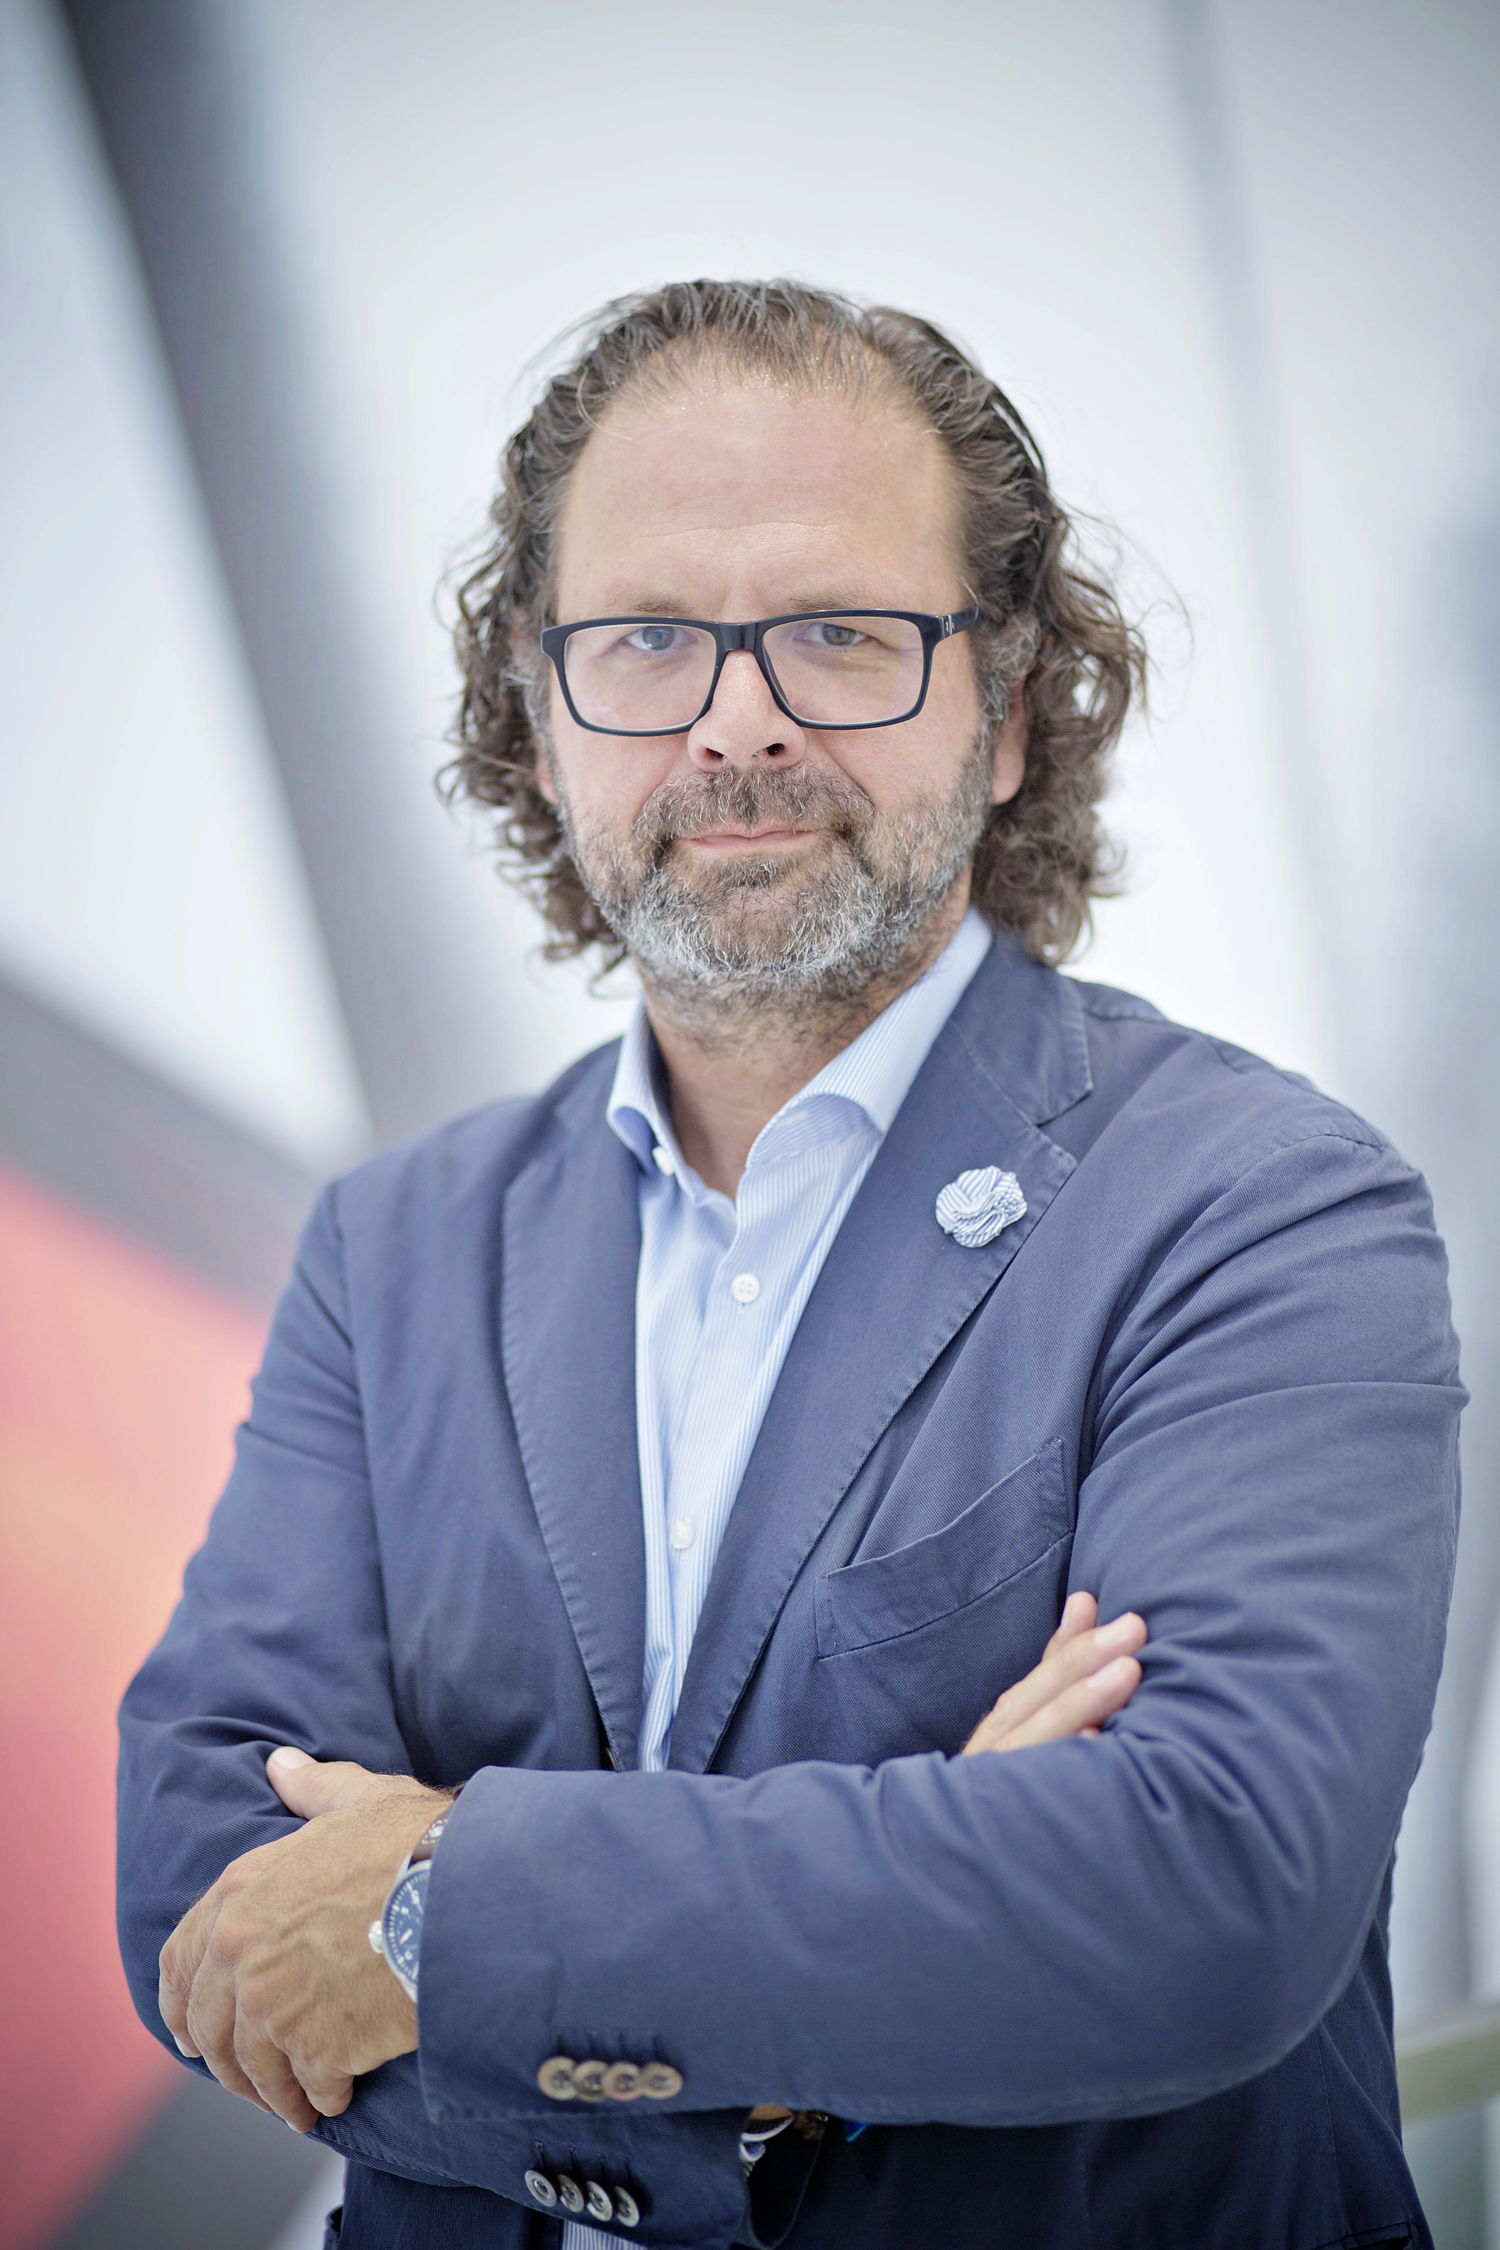 From 1 September 2017, Oliver Stefani will be responsible for design at ŠKODA AUTO. The 53-year-old was most recently Head of Exterior Design for the Volkswagen brand.